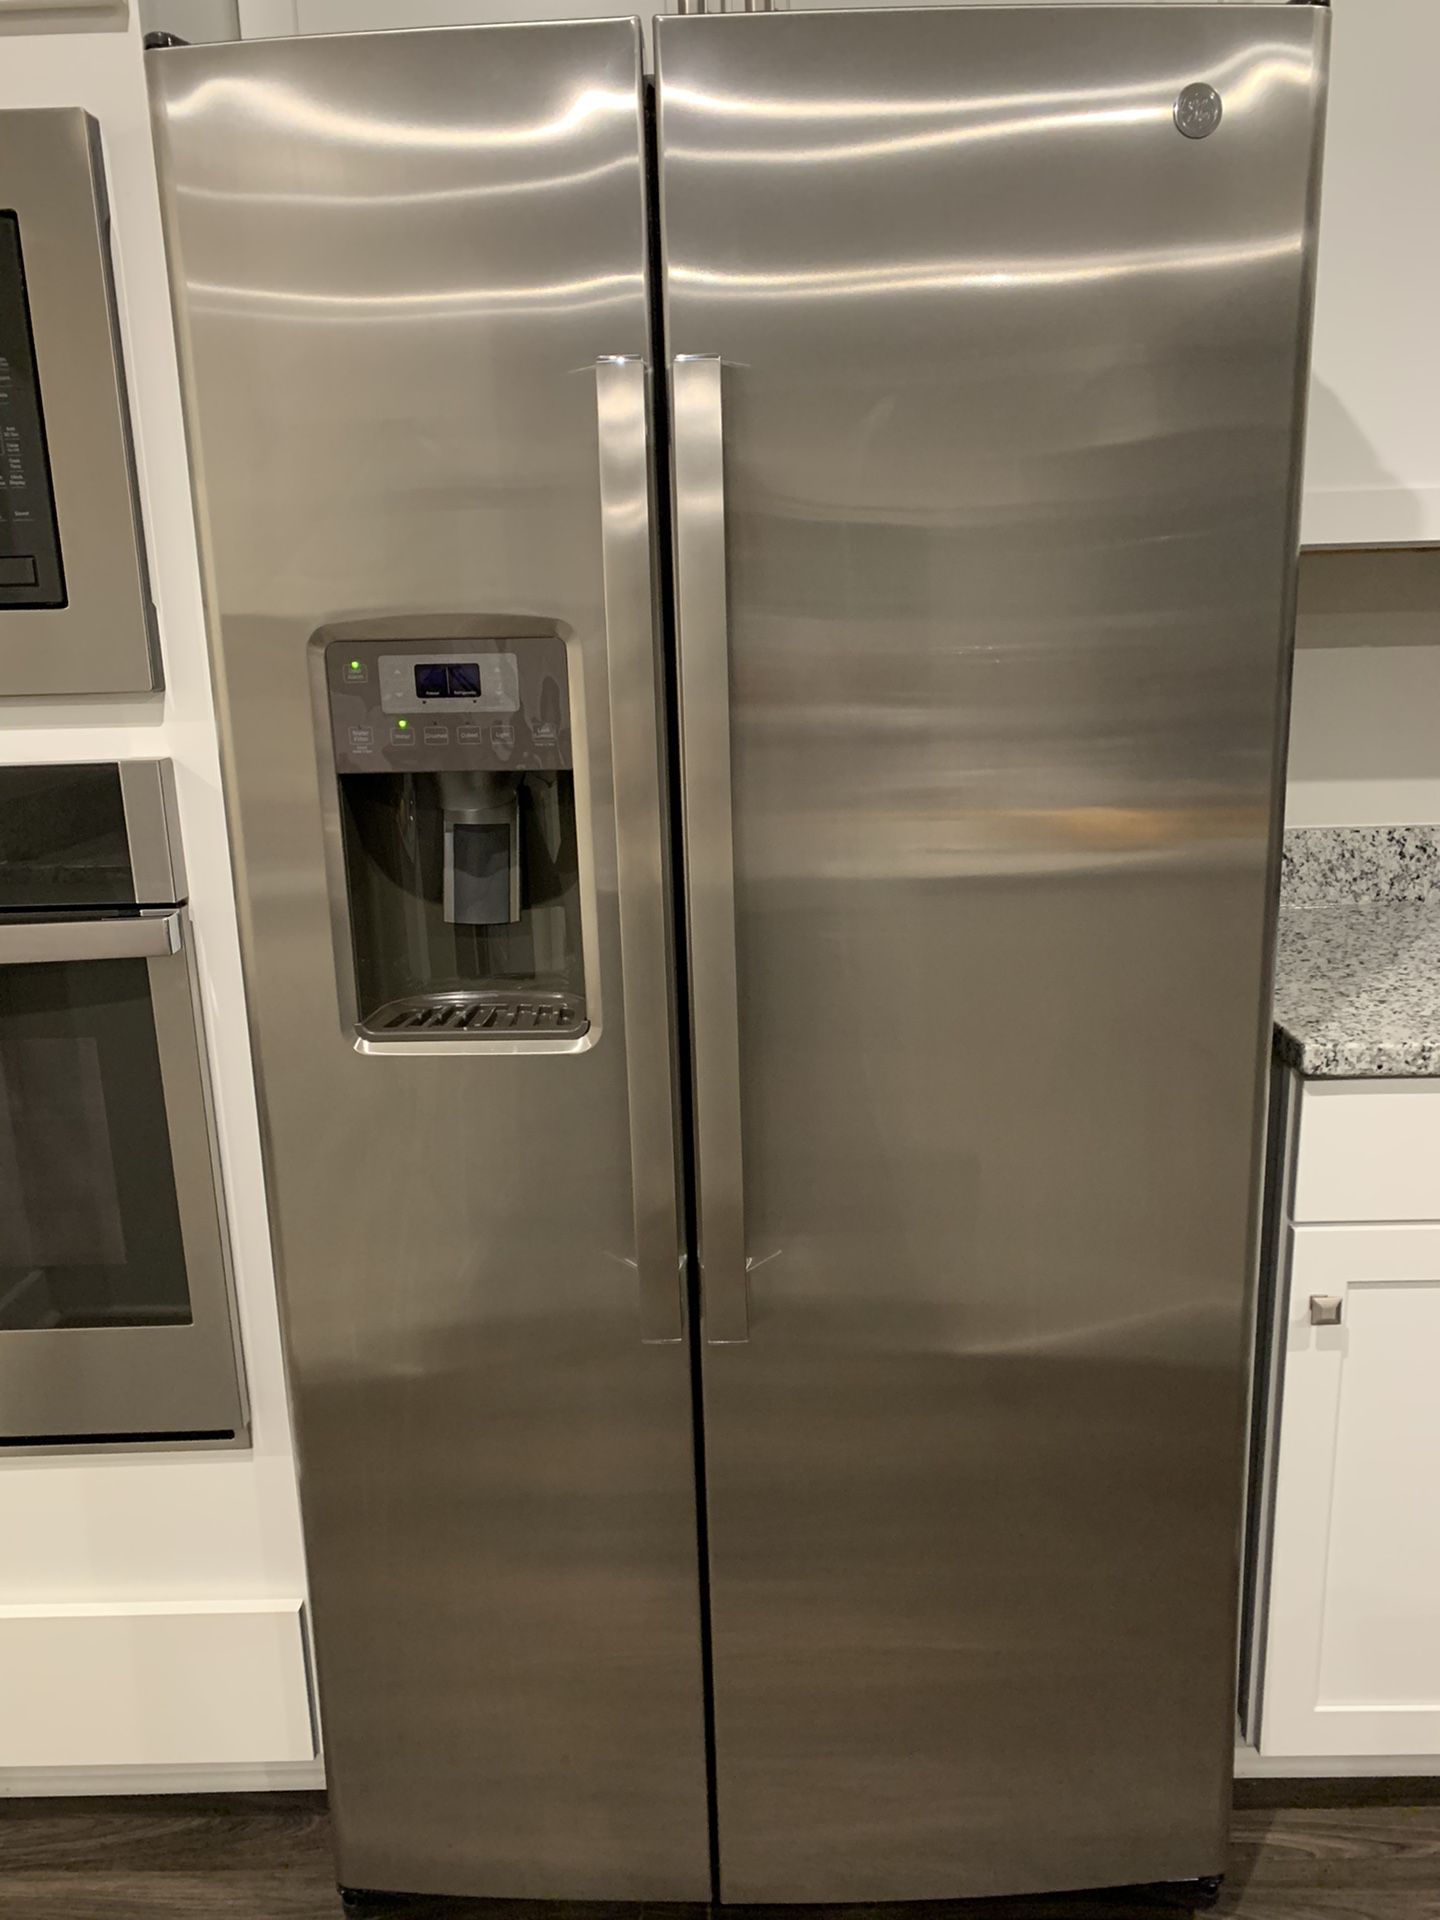 $450.00 BRAND NEW:: 25.3 cu. ft. GE Side by Side Refrigerator in Stainless Steel